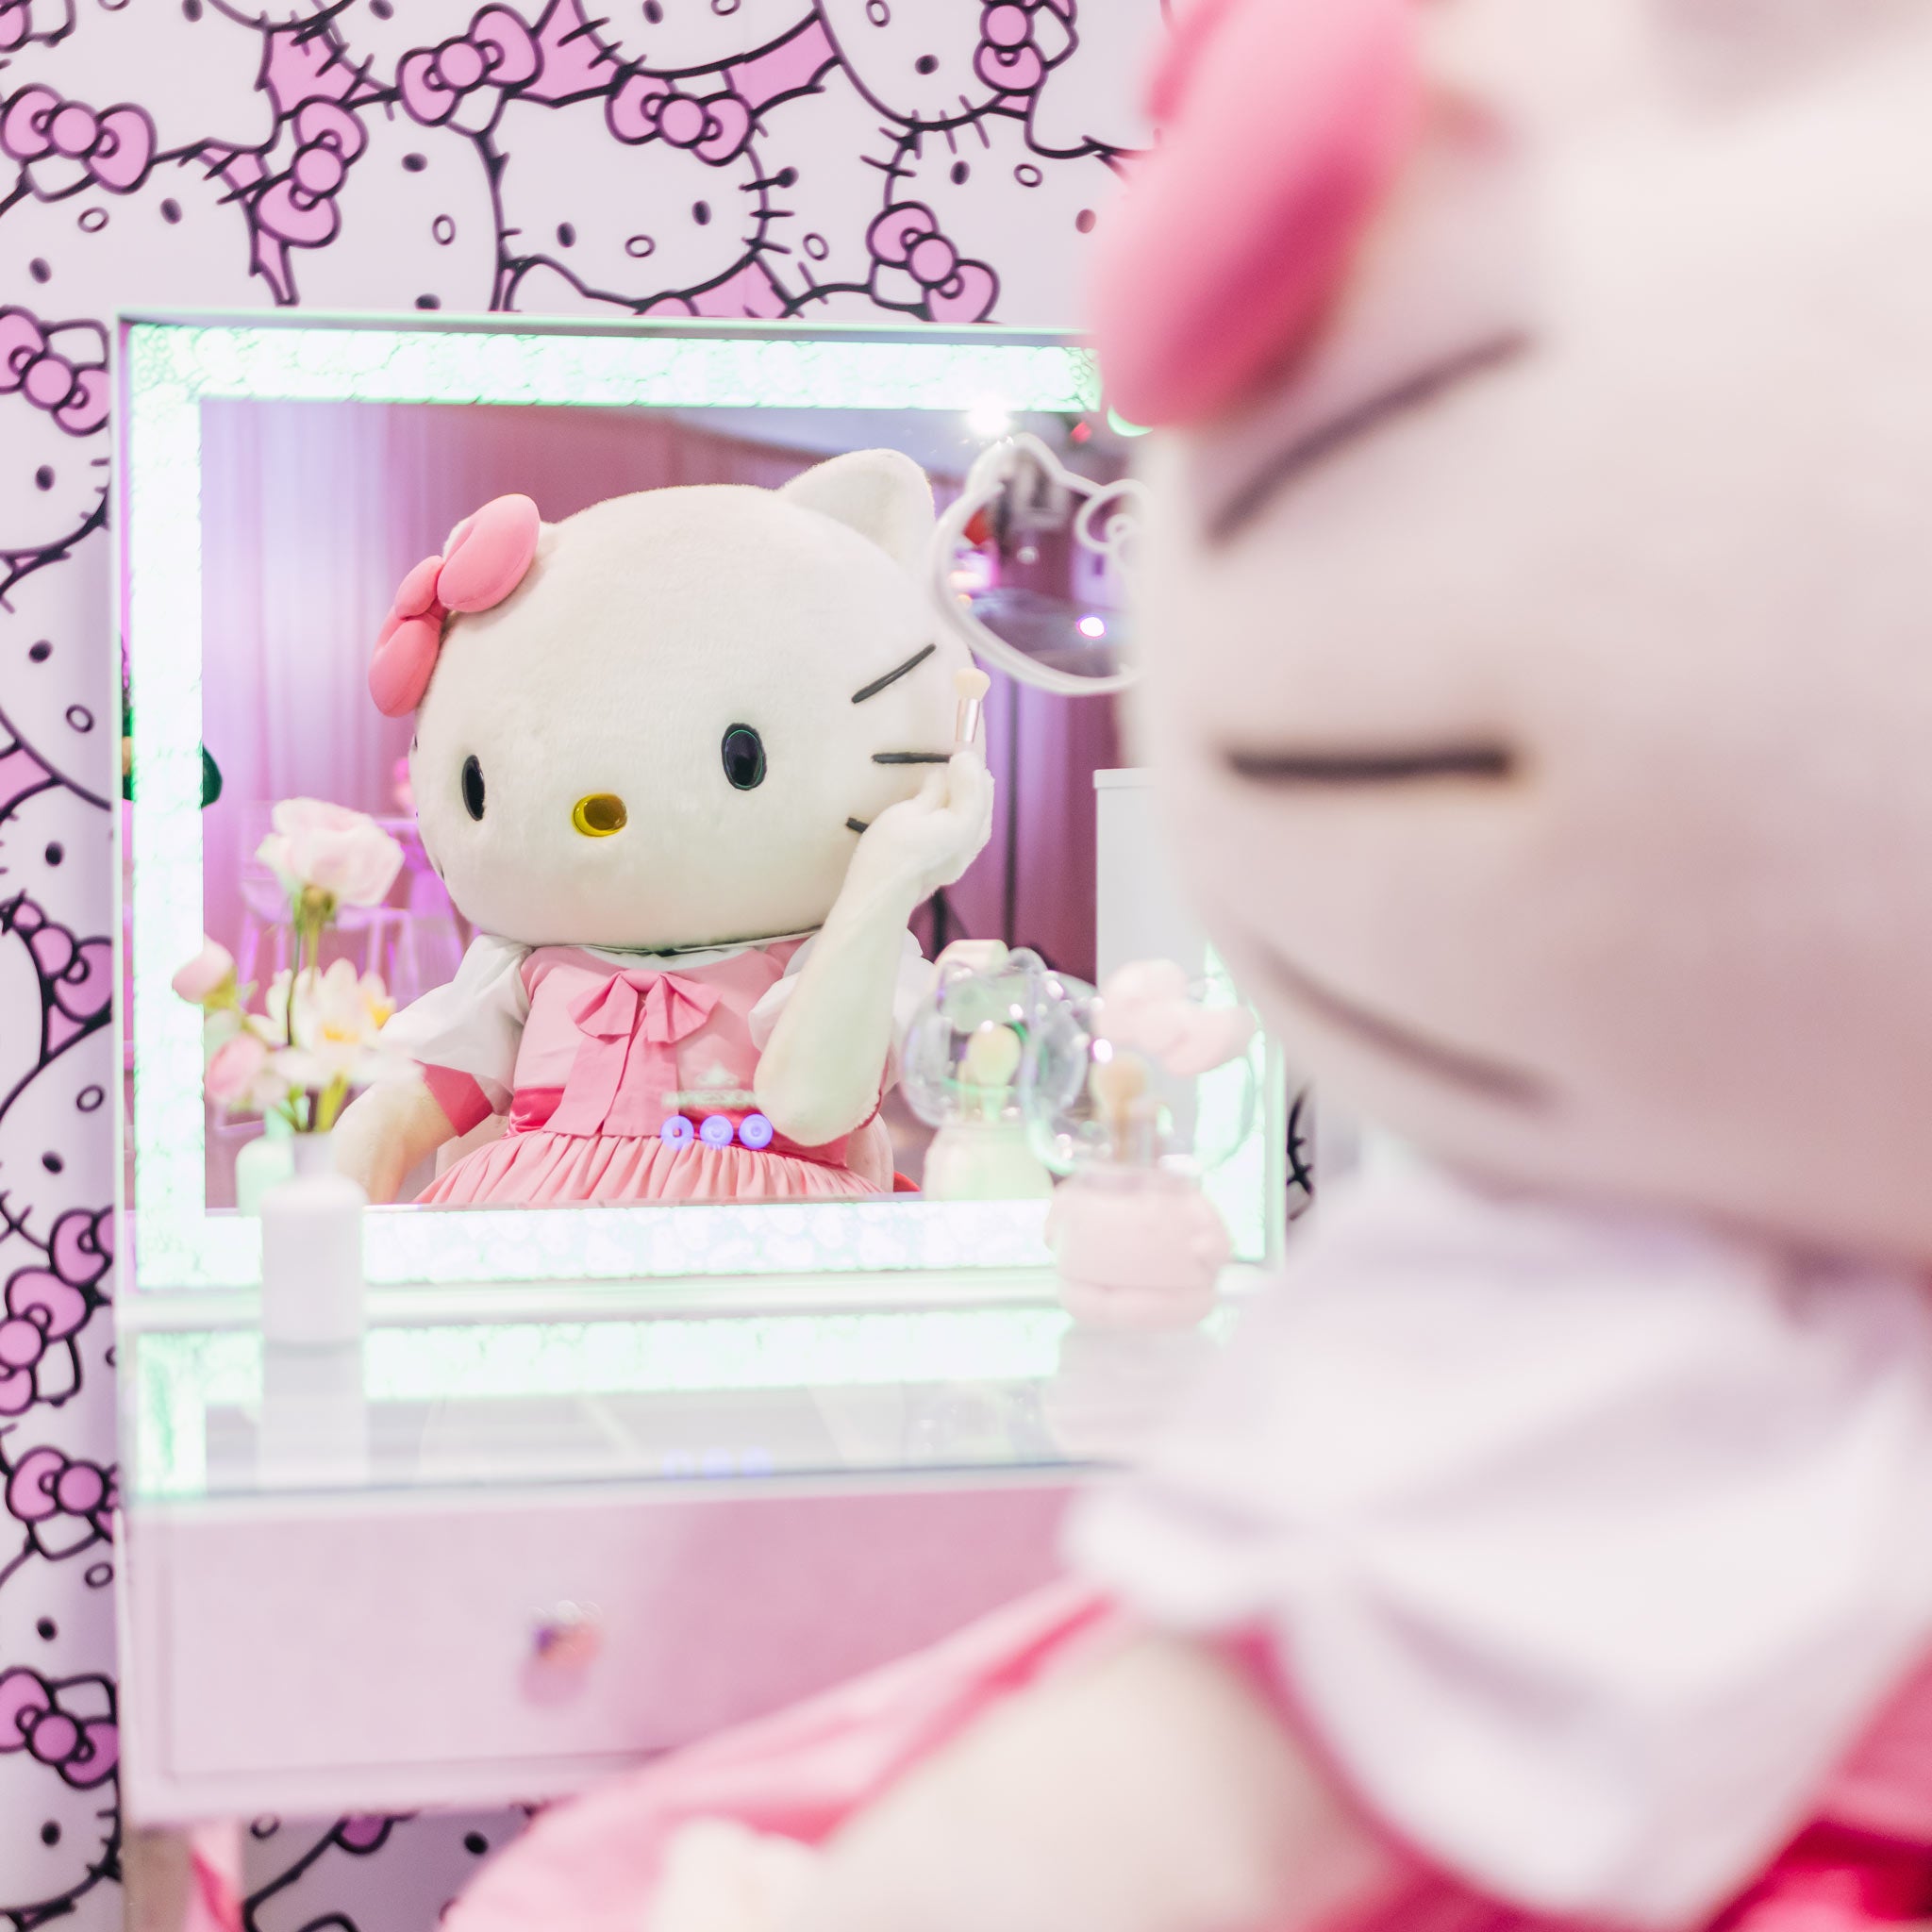 Hello Kitty RGB Plus Vanity Makeup Mirror for Desk, App and Soft Touch Control Dimmable Rainbow LED Impressions Vanity · Company